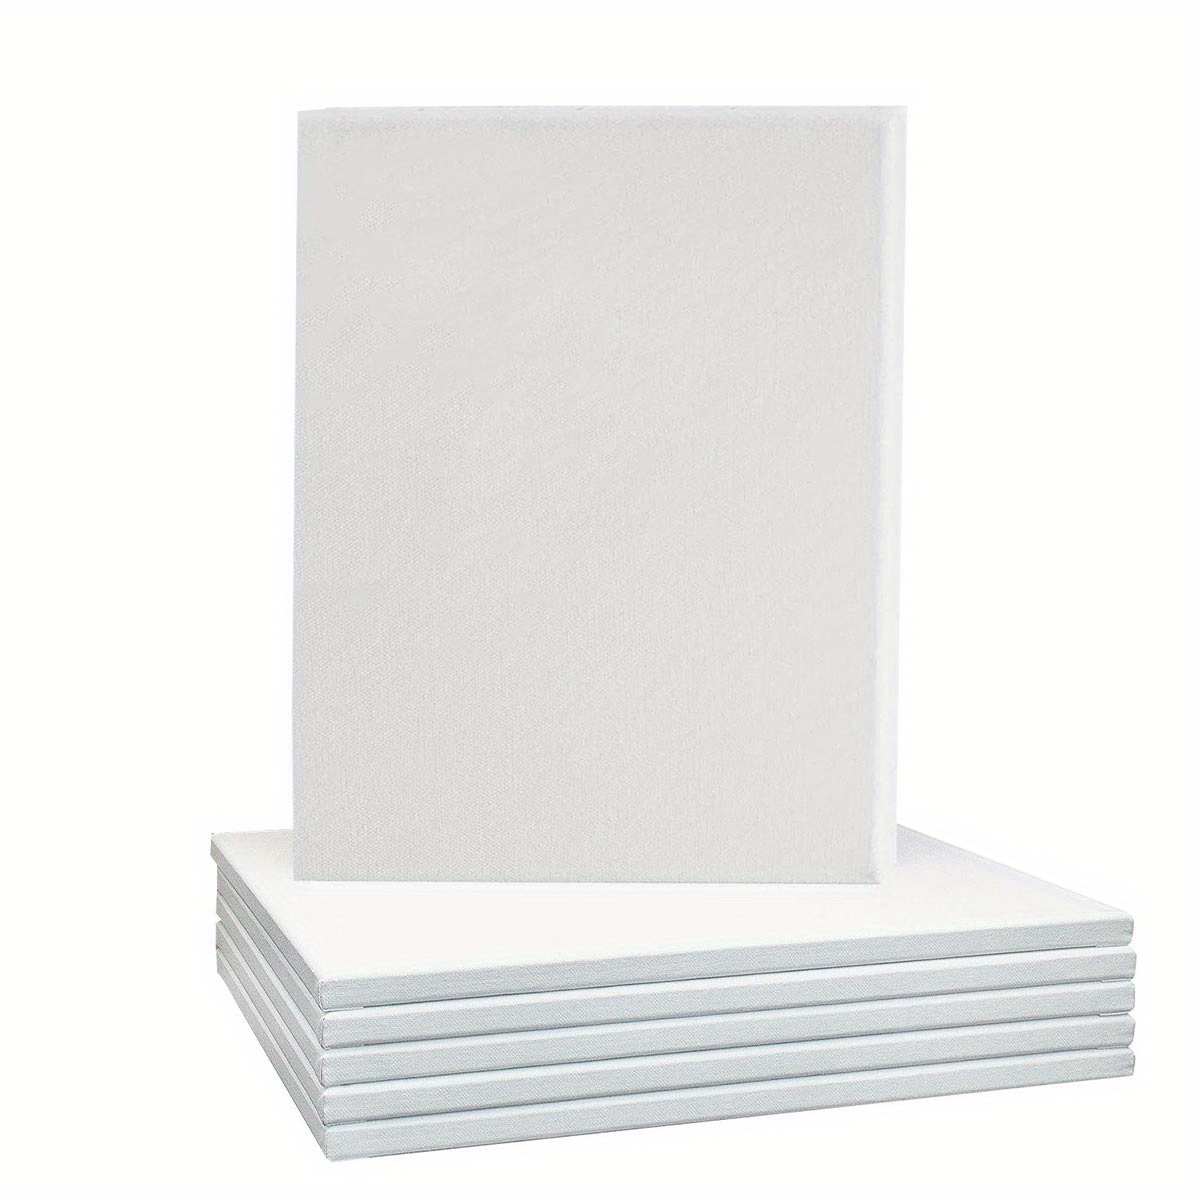 Arteza Paint Canvases for Painting, Pack of 6, 16 x 20 Inches